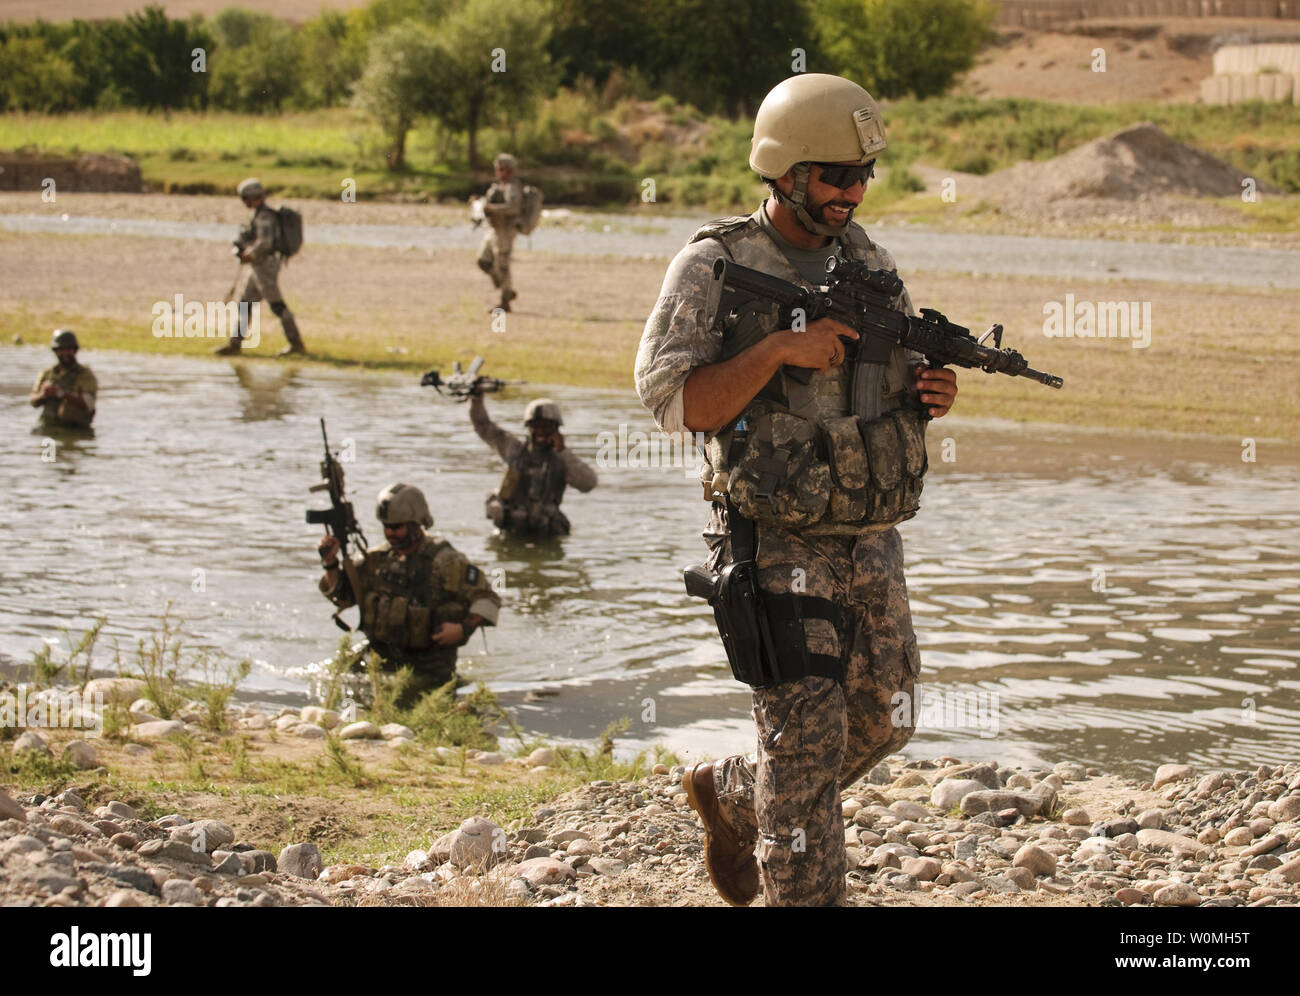 U.S. Army Cpl. Alberto Bhoge, Charlie Company, 478th Civil Affairs Battalion, laughs after crossing a river during a dismounted patrol near Forward Operating Base Lane, Zabul Province, Afghanistan on August 6, 2010. UPI/Nathanael Callon/U.S. Air Force Stock Photo